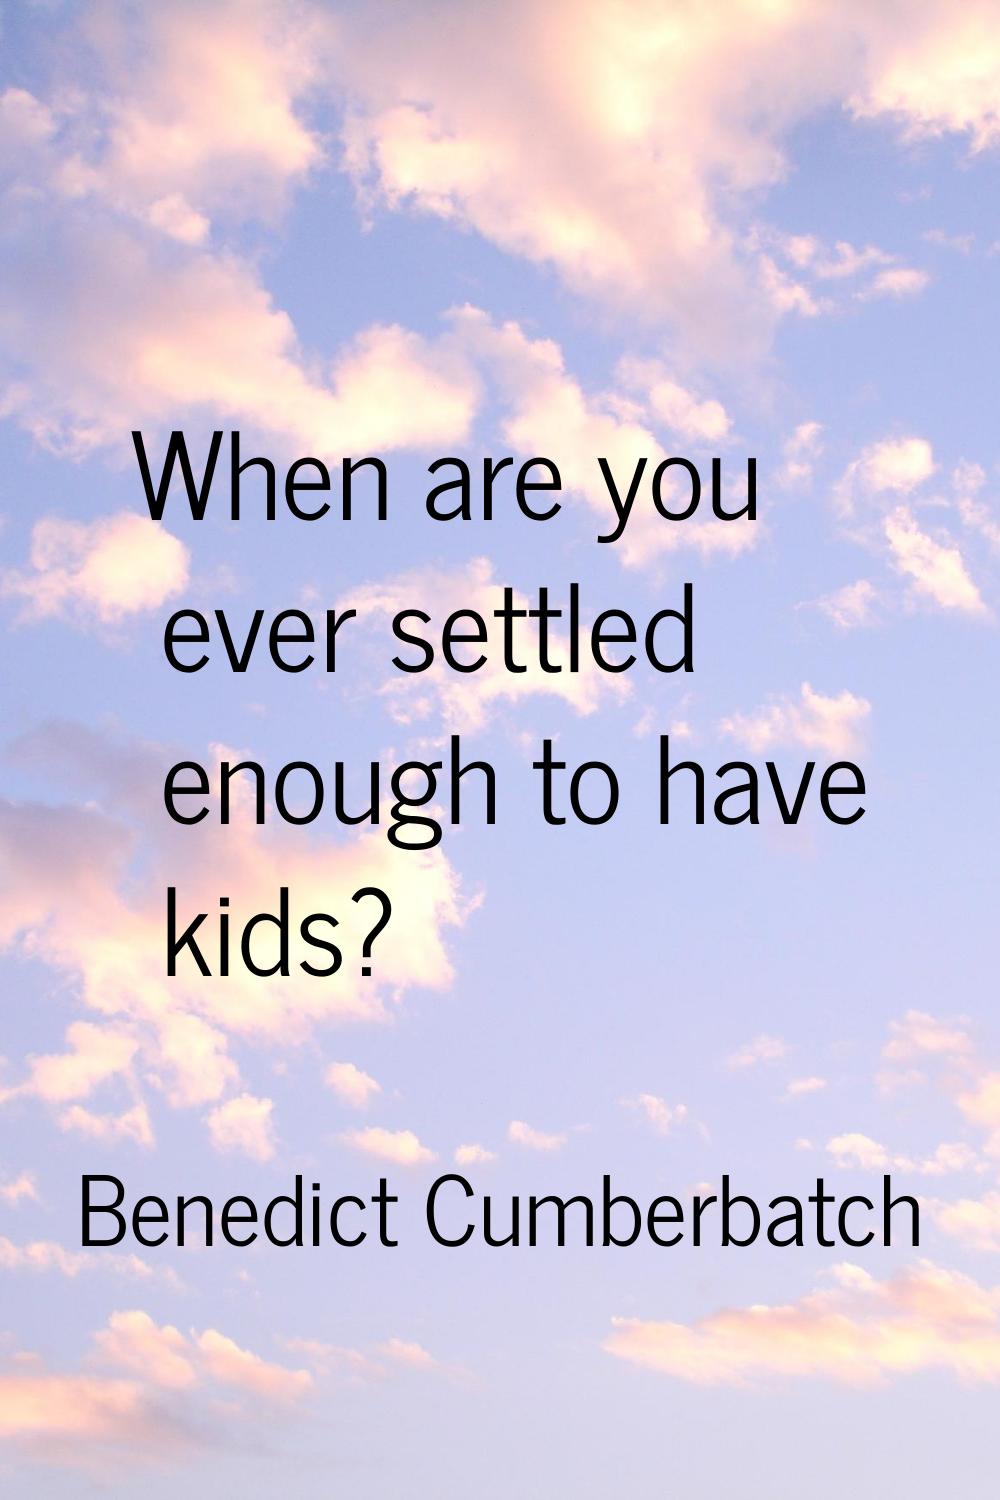 When are you ever settled enough to have kids?